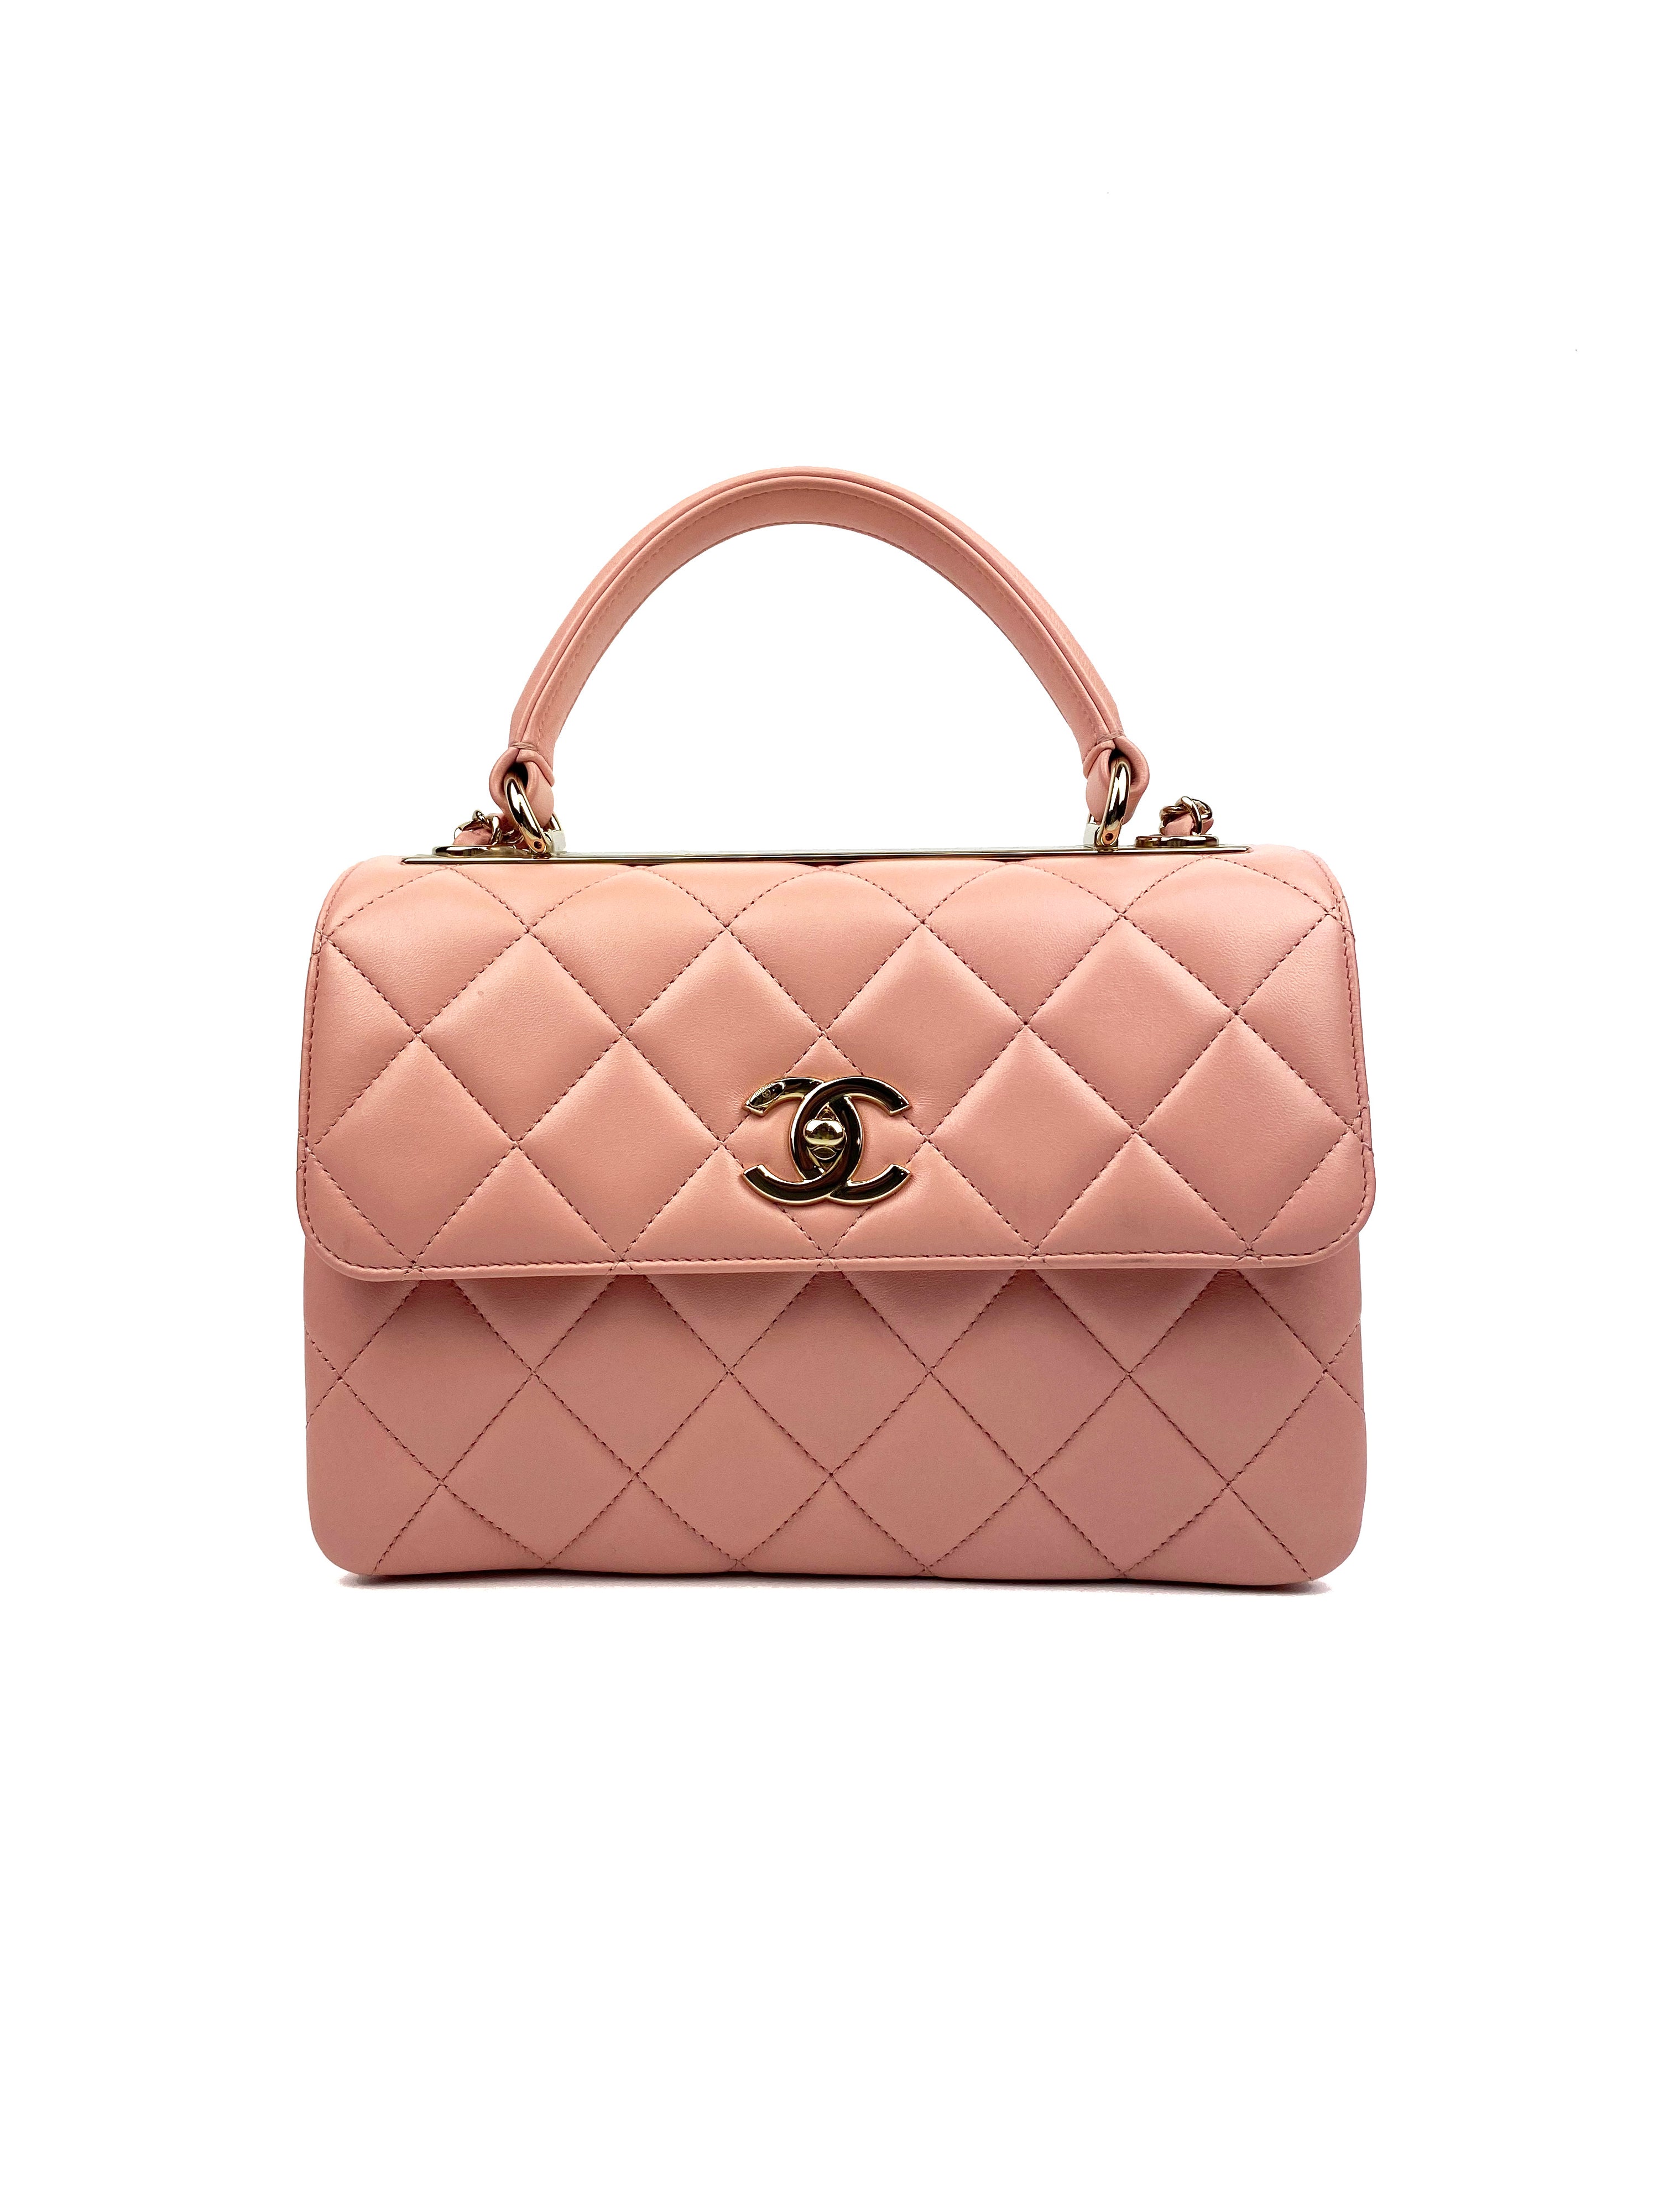 Chanel Pink Quilted Lambskin Leather Small Trendy CC Flap Bag